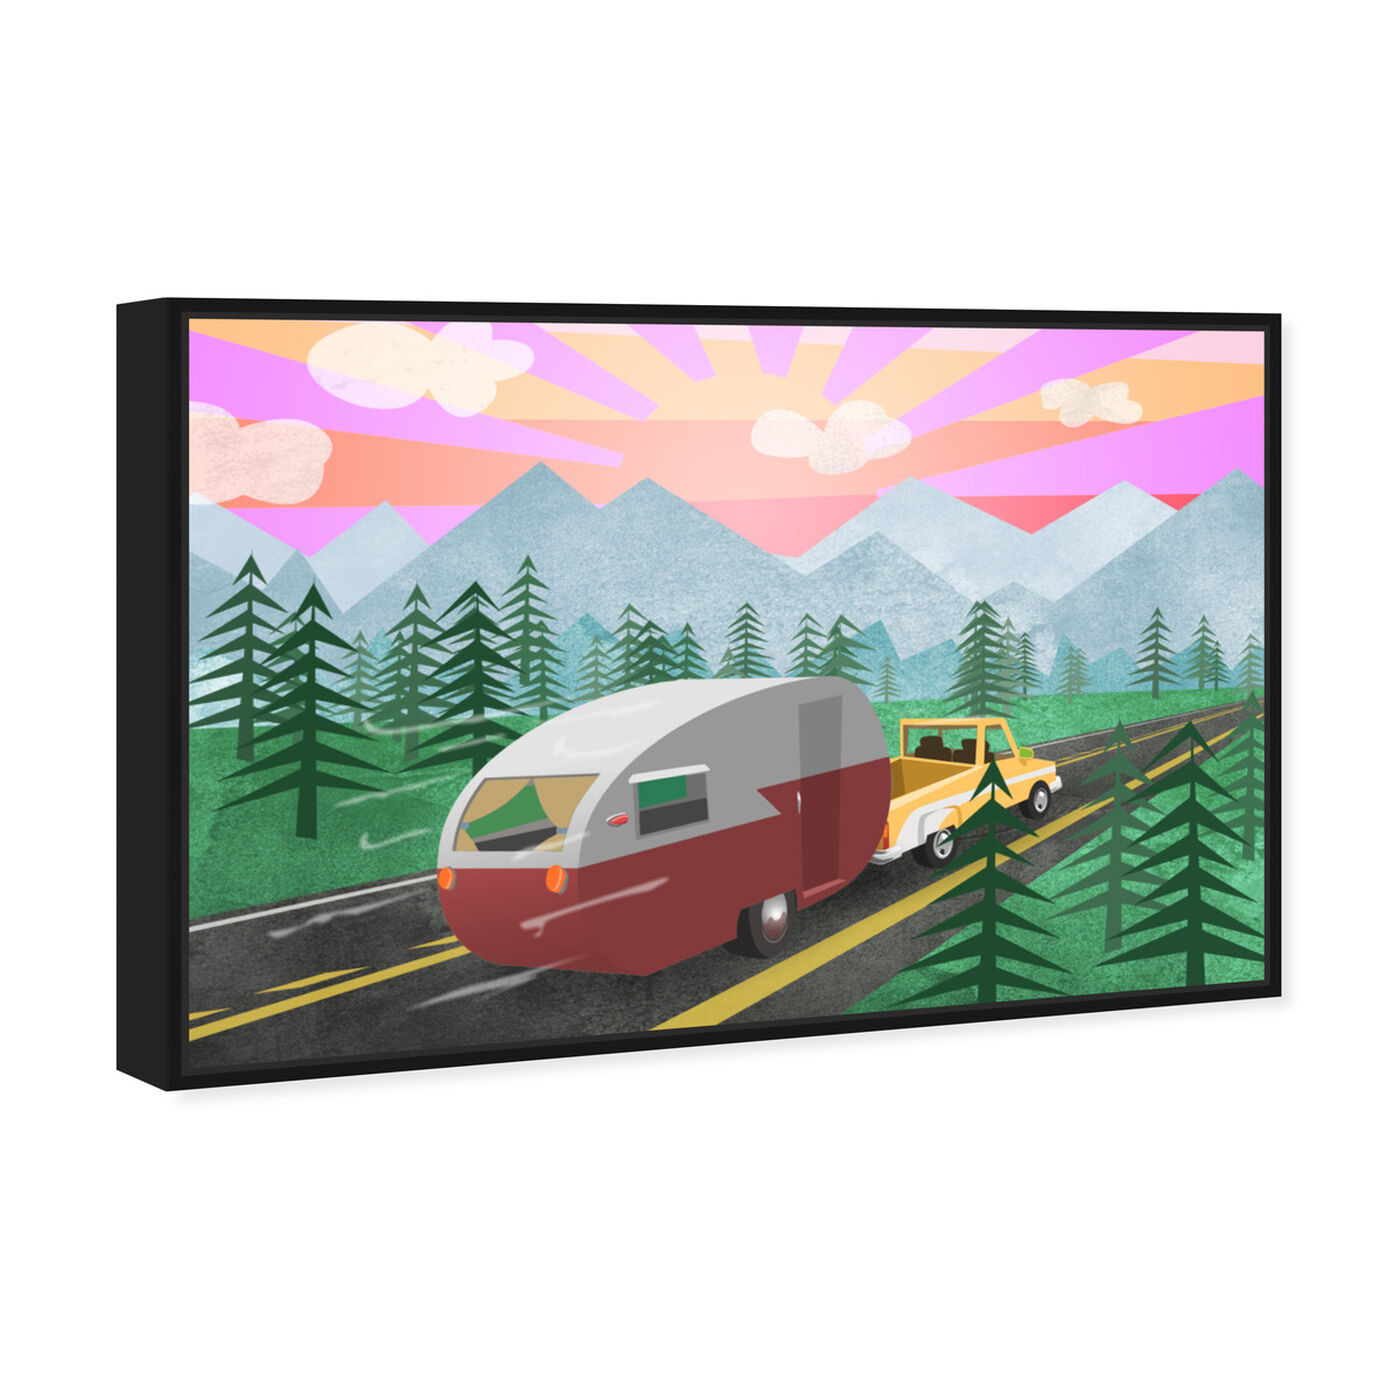 Angled view of Cool Camper featuring entertainment and hobbies and camping art.